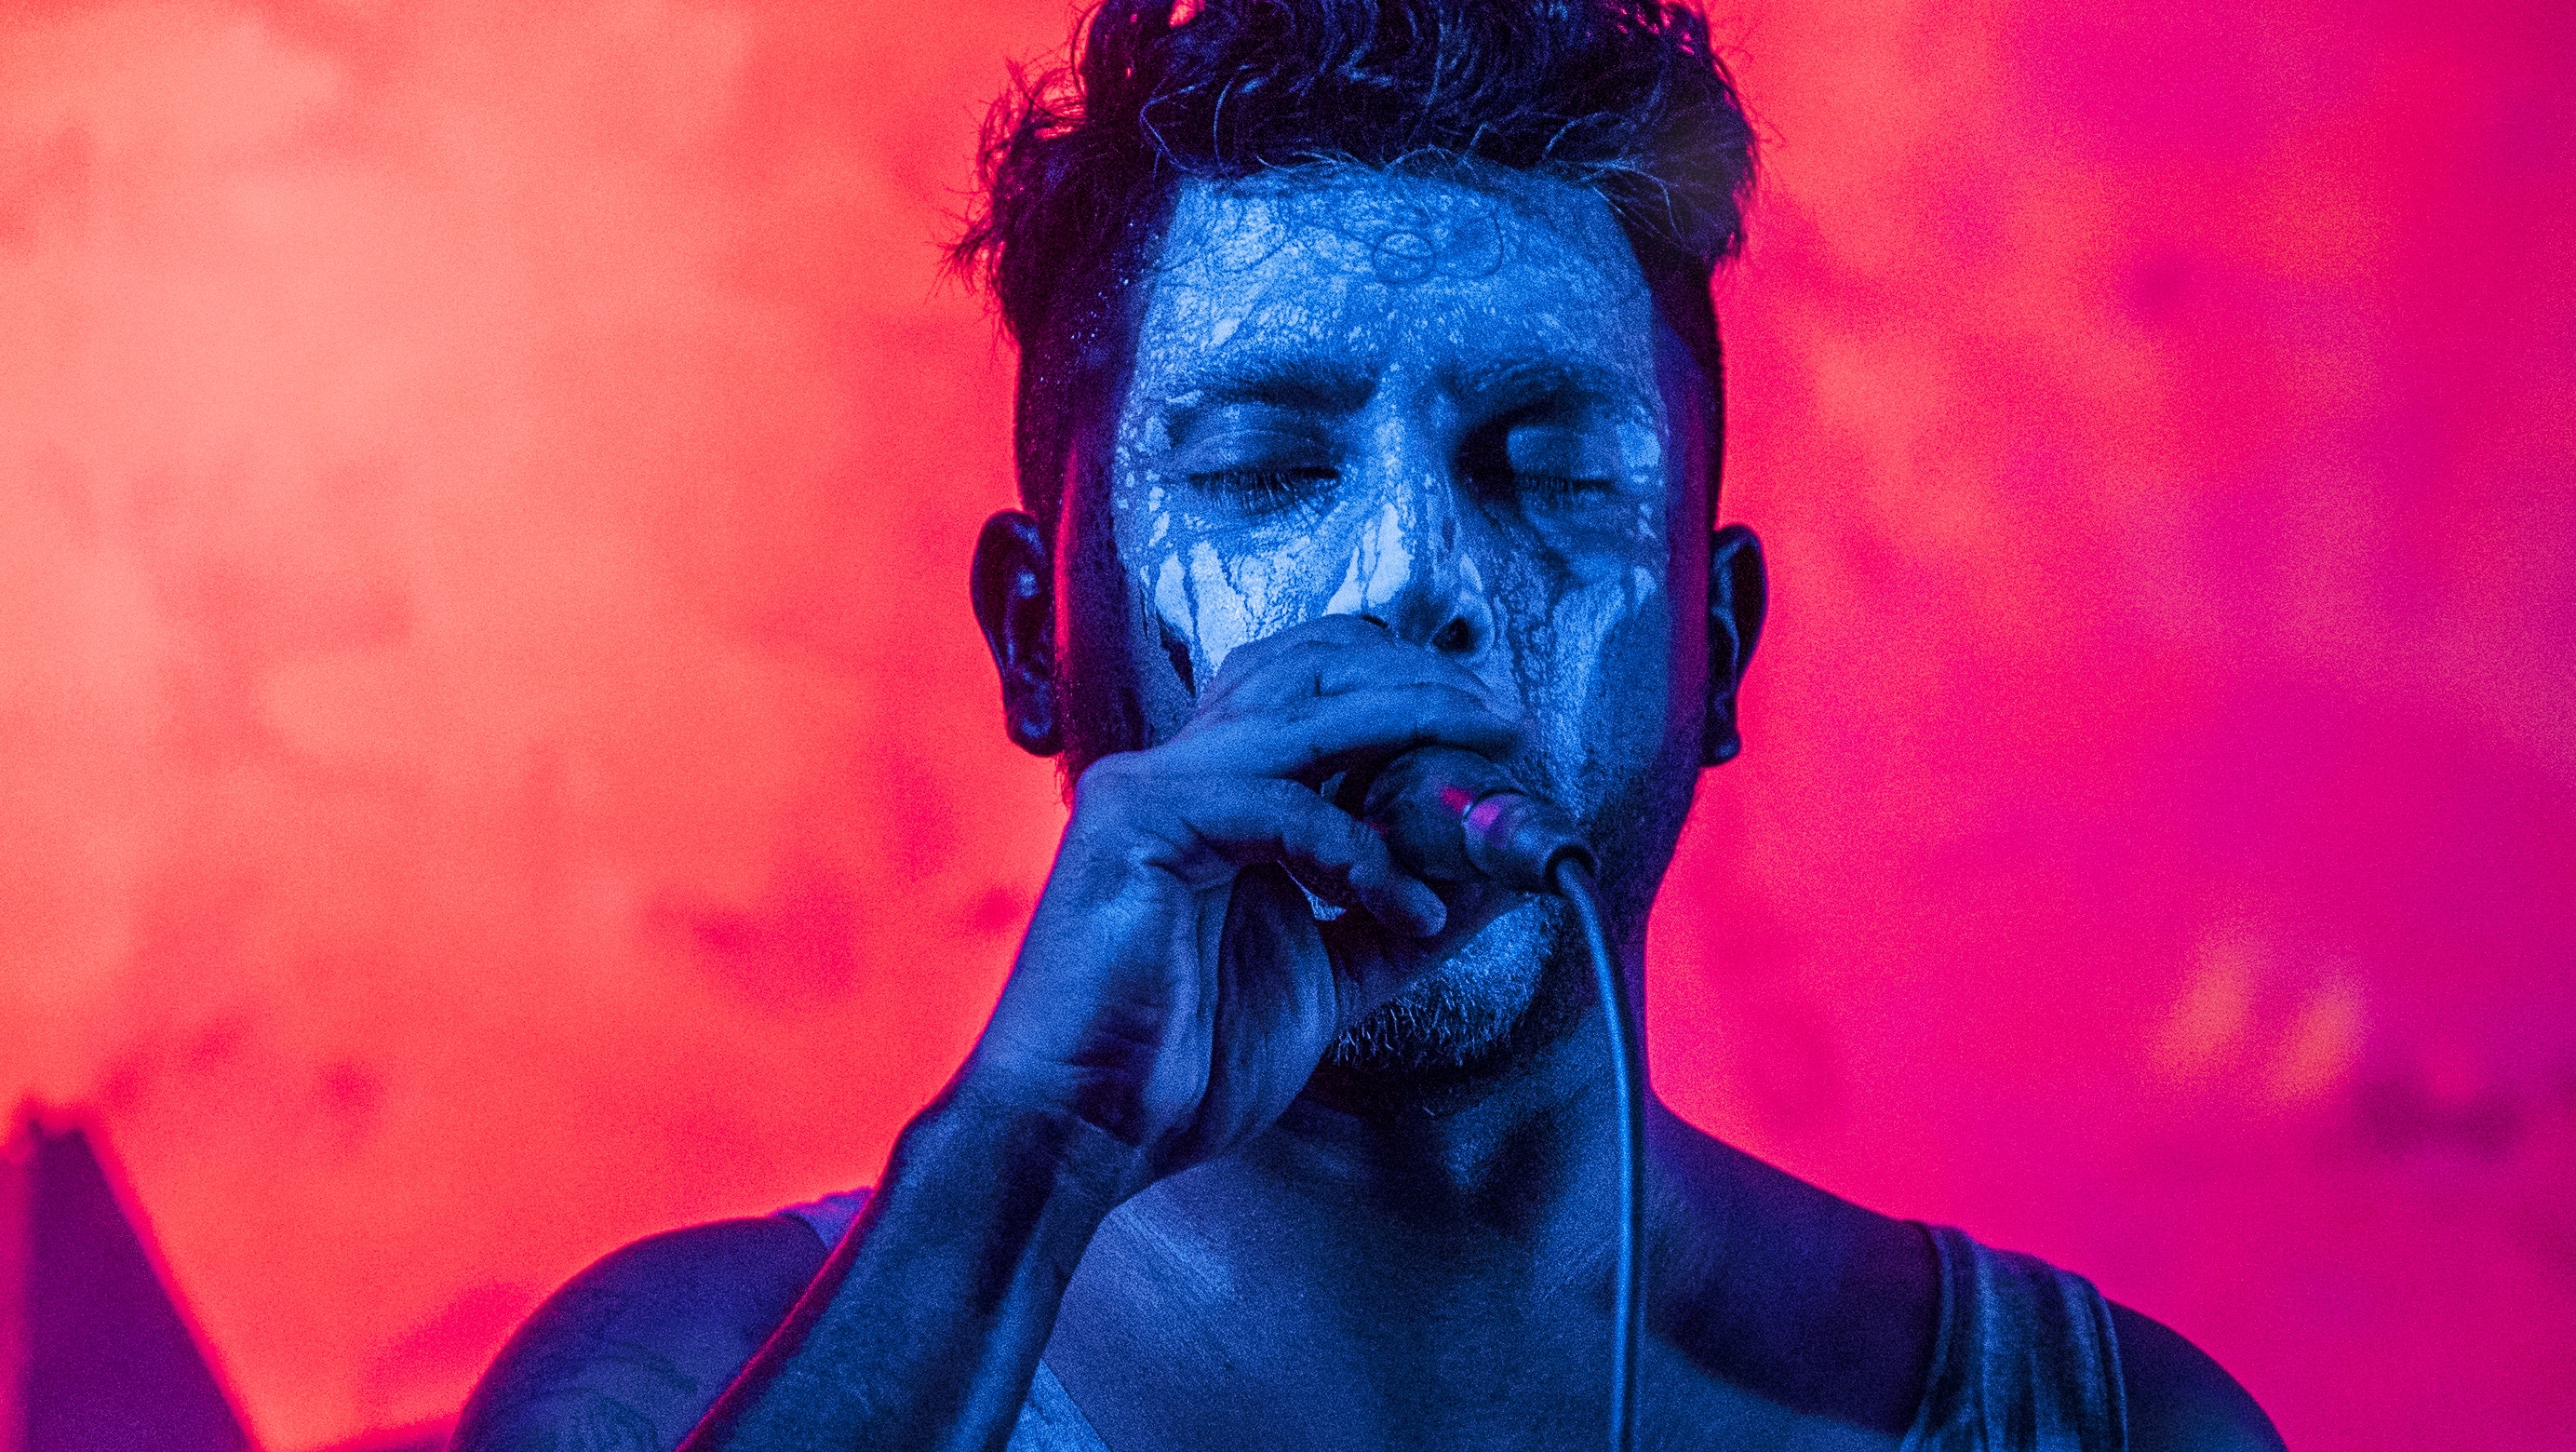 man in blue body paint holding microphone